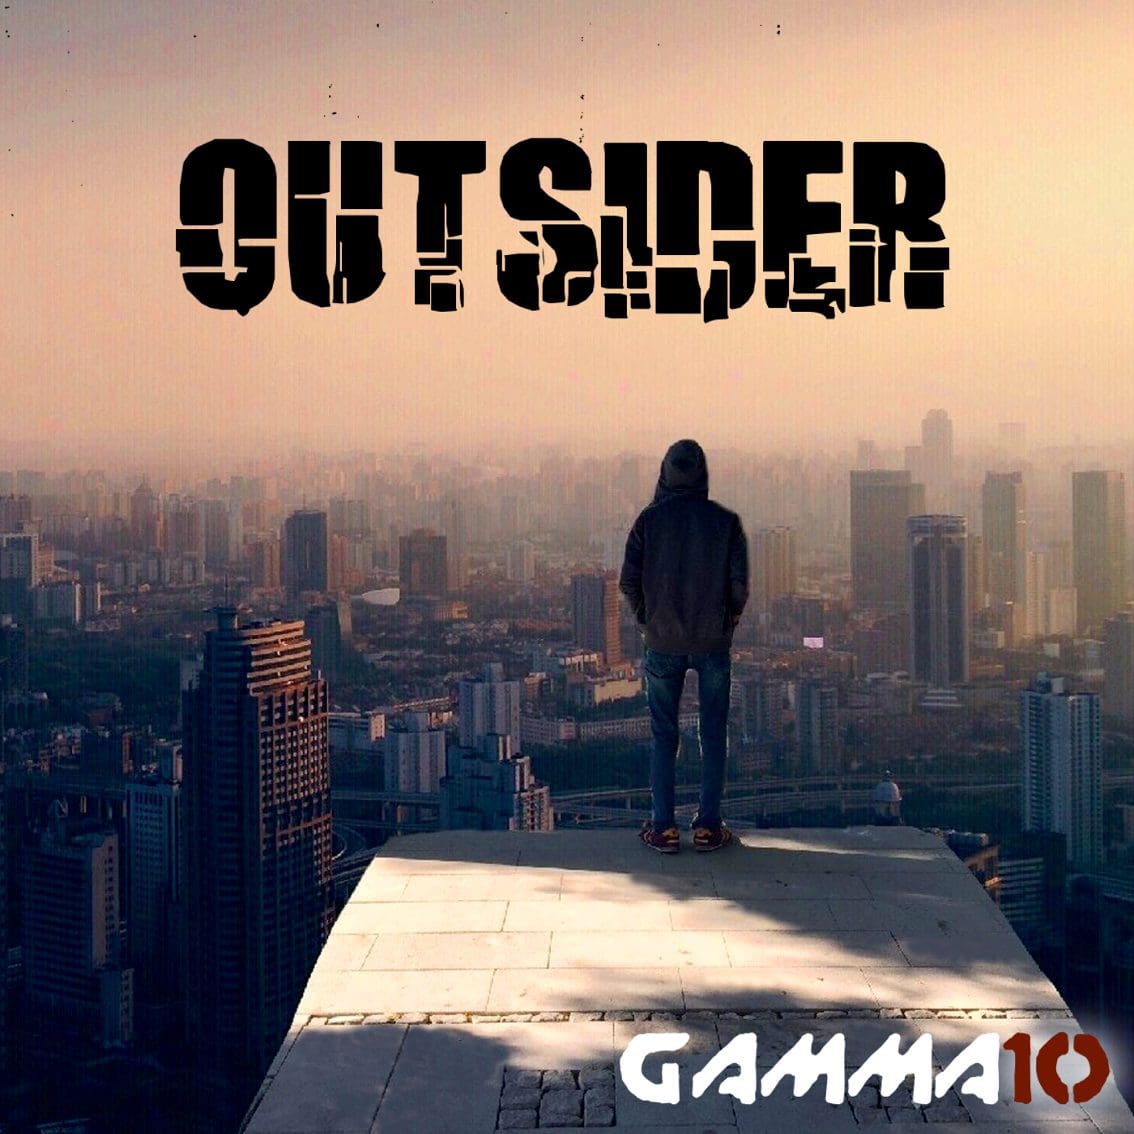 Gamma10's new album 'Outsider' is out now - check the preview and get a 20% discount code!